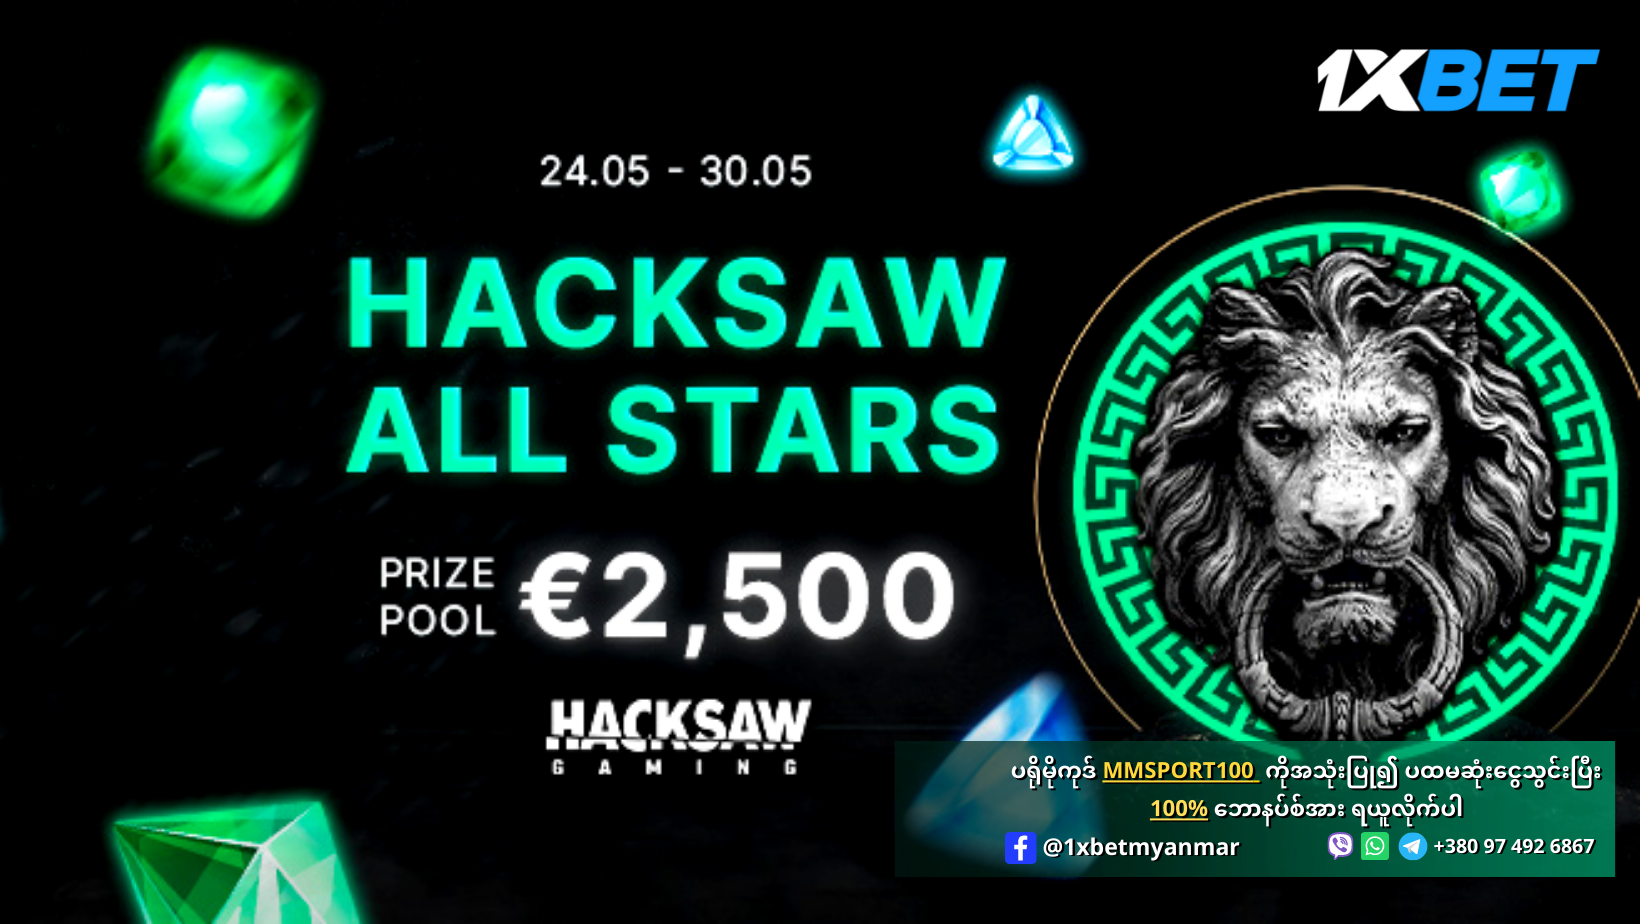 1xBet Hacksaw All Stars Promotion